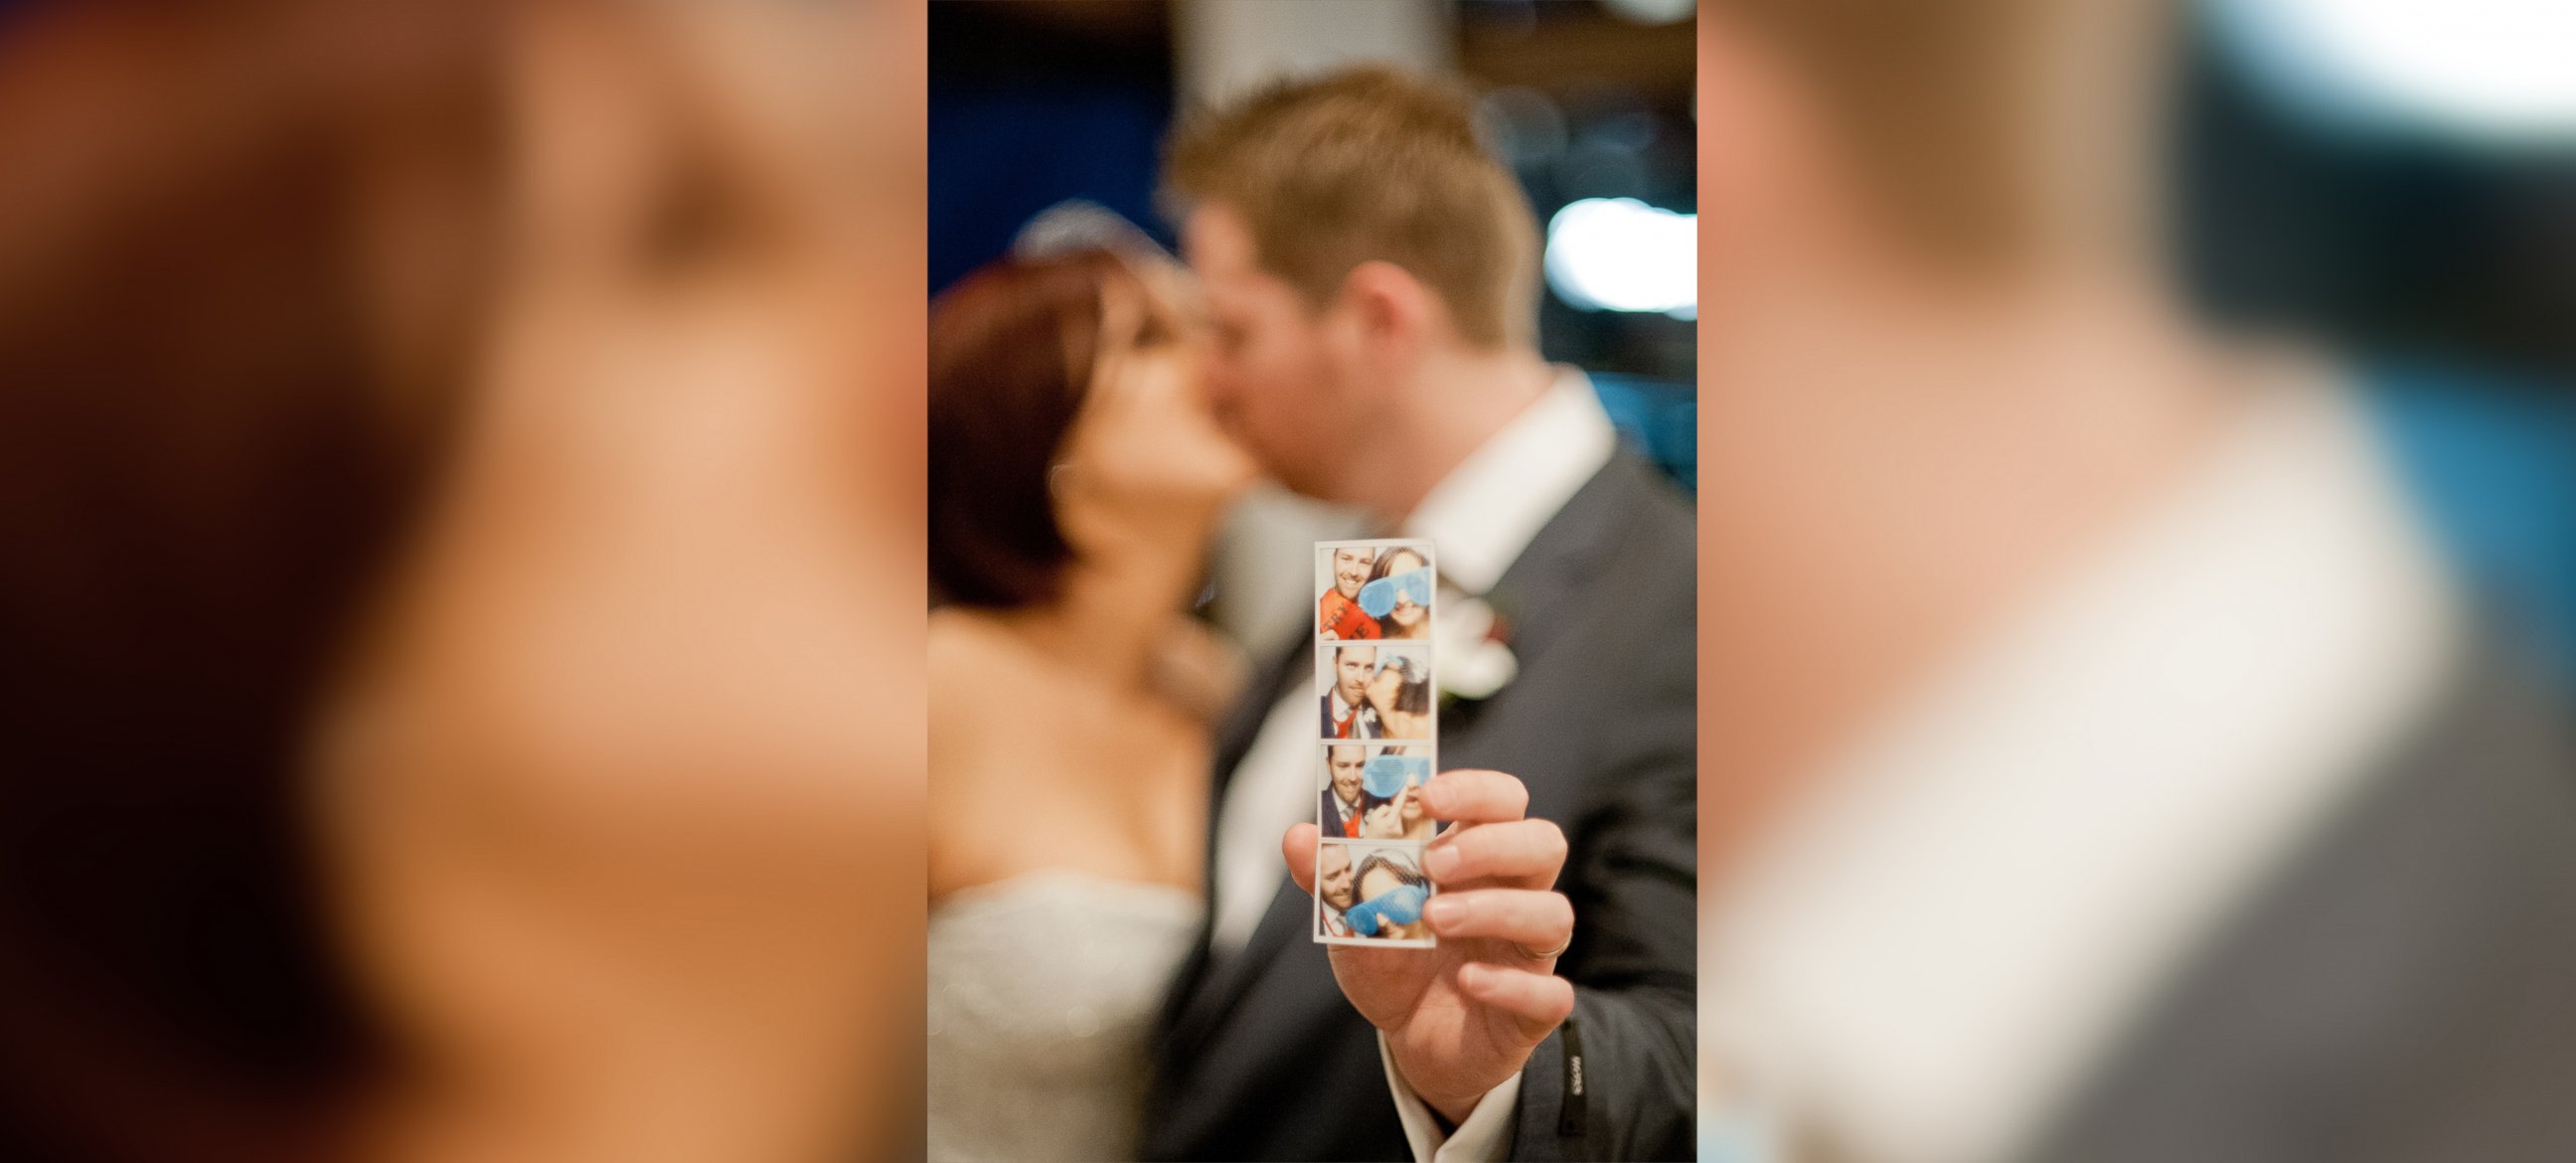 PHOTO: Photobooths have become ubiquitous at weddings in recent years.